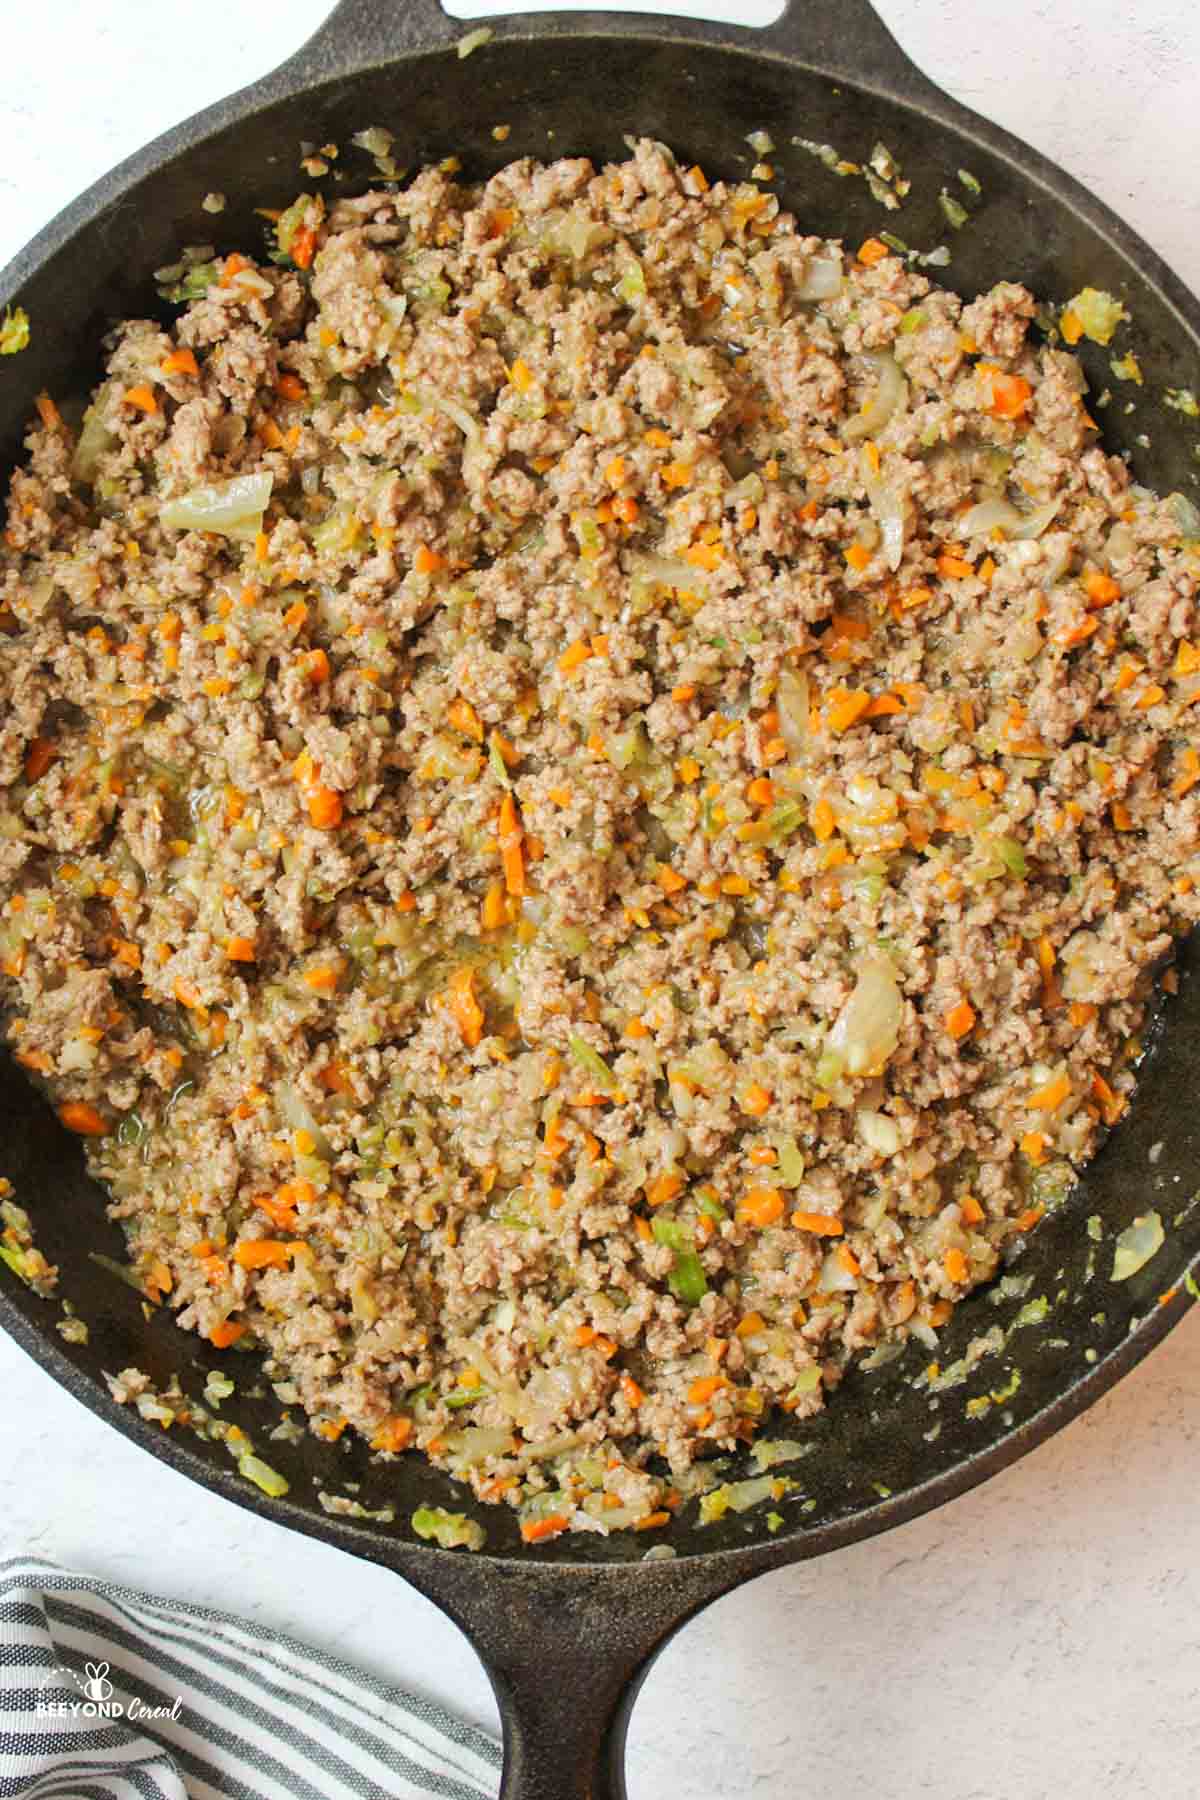 cooked ground beef with finely chopped veggies in a cast iron skillet